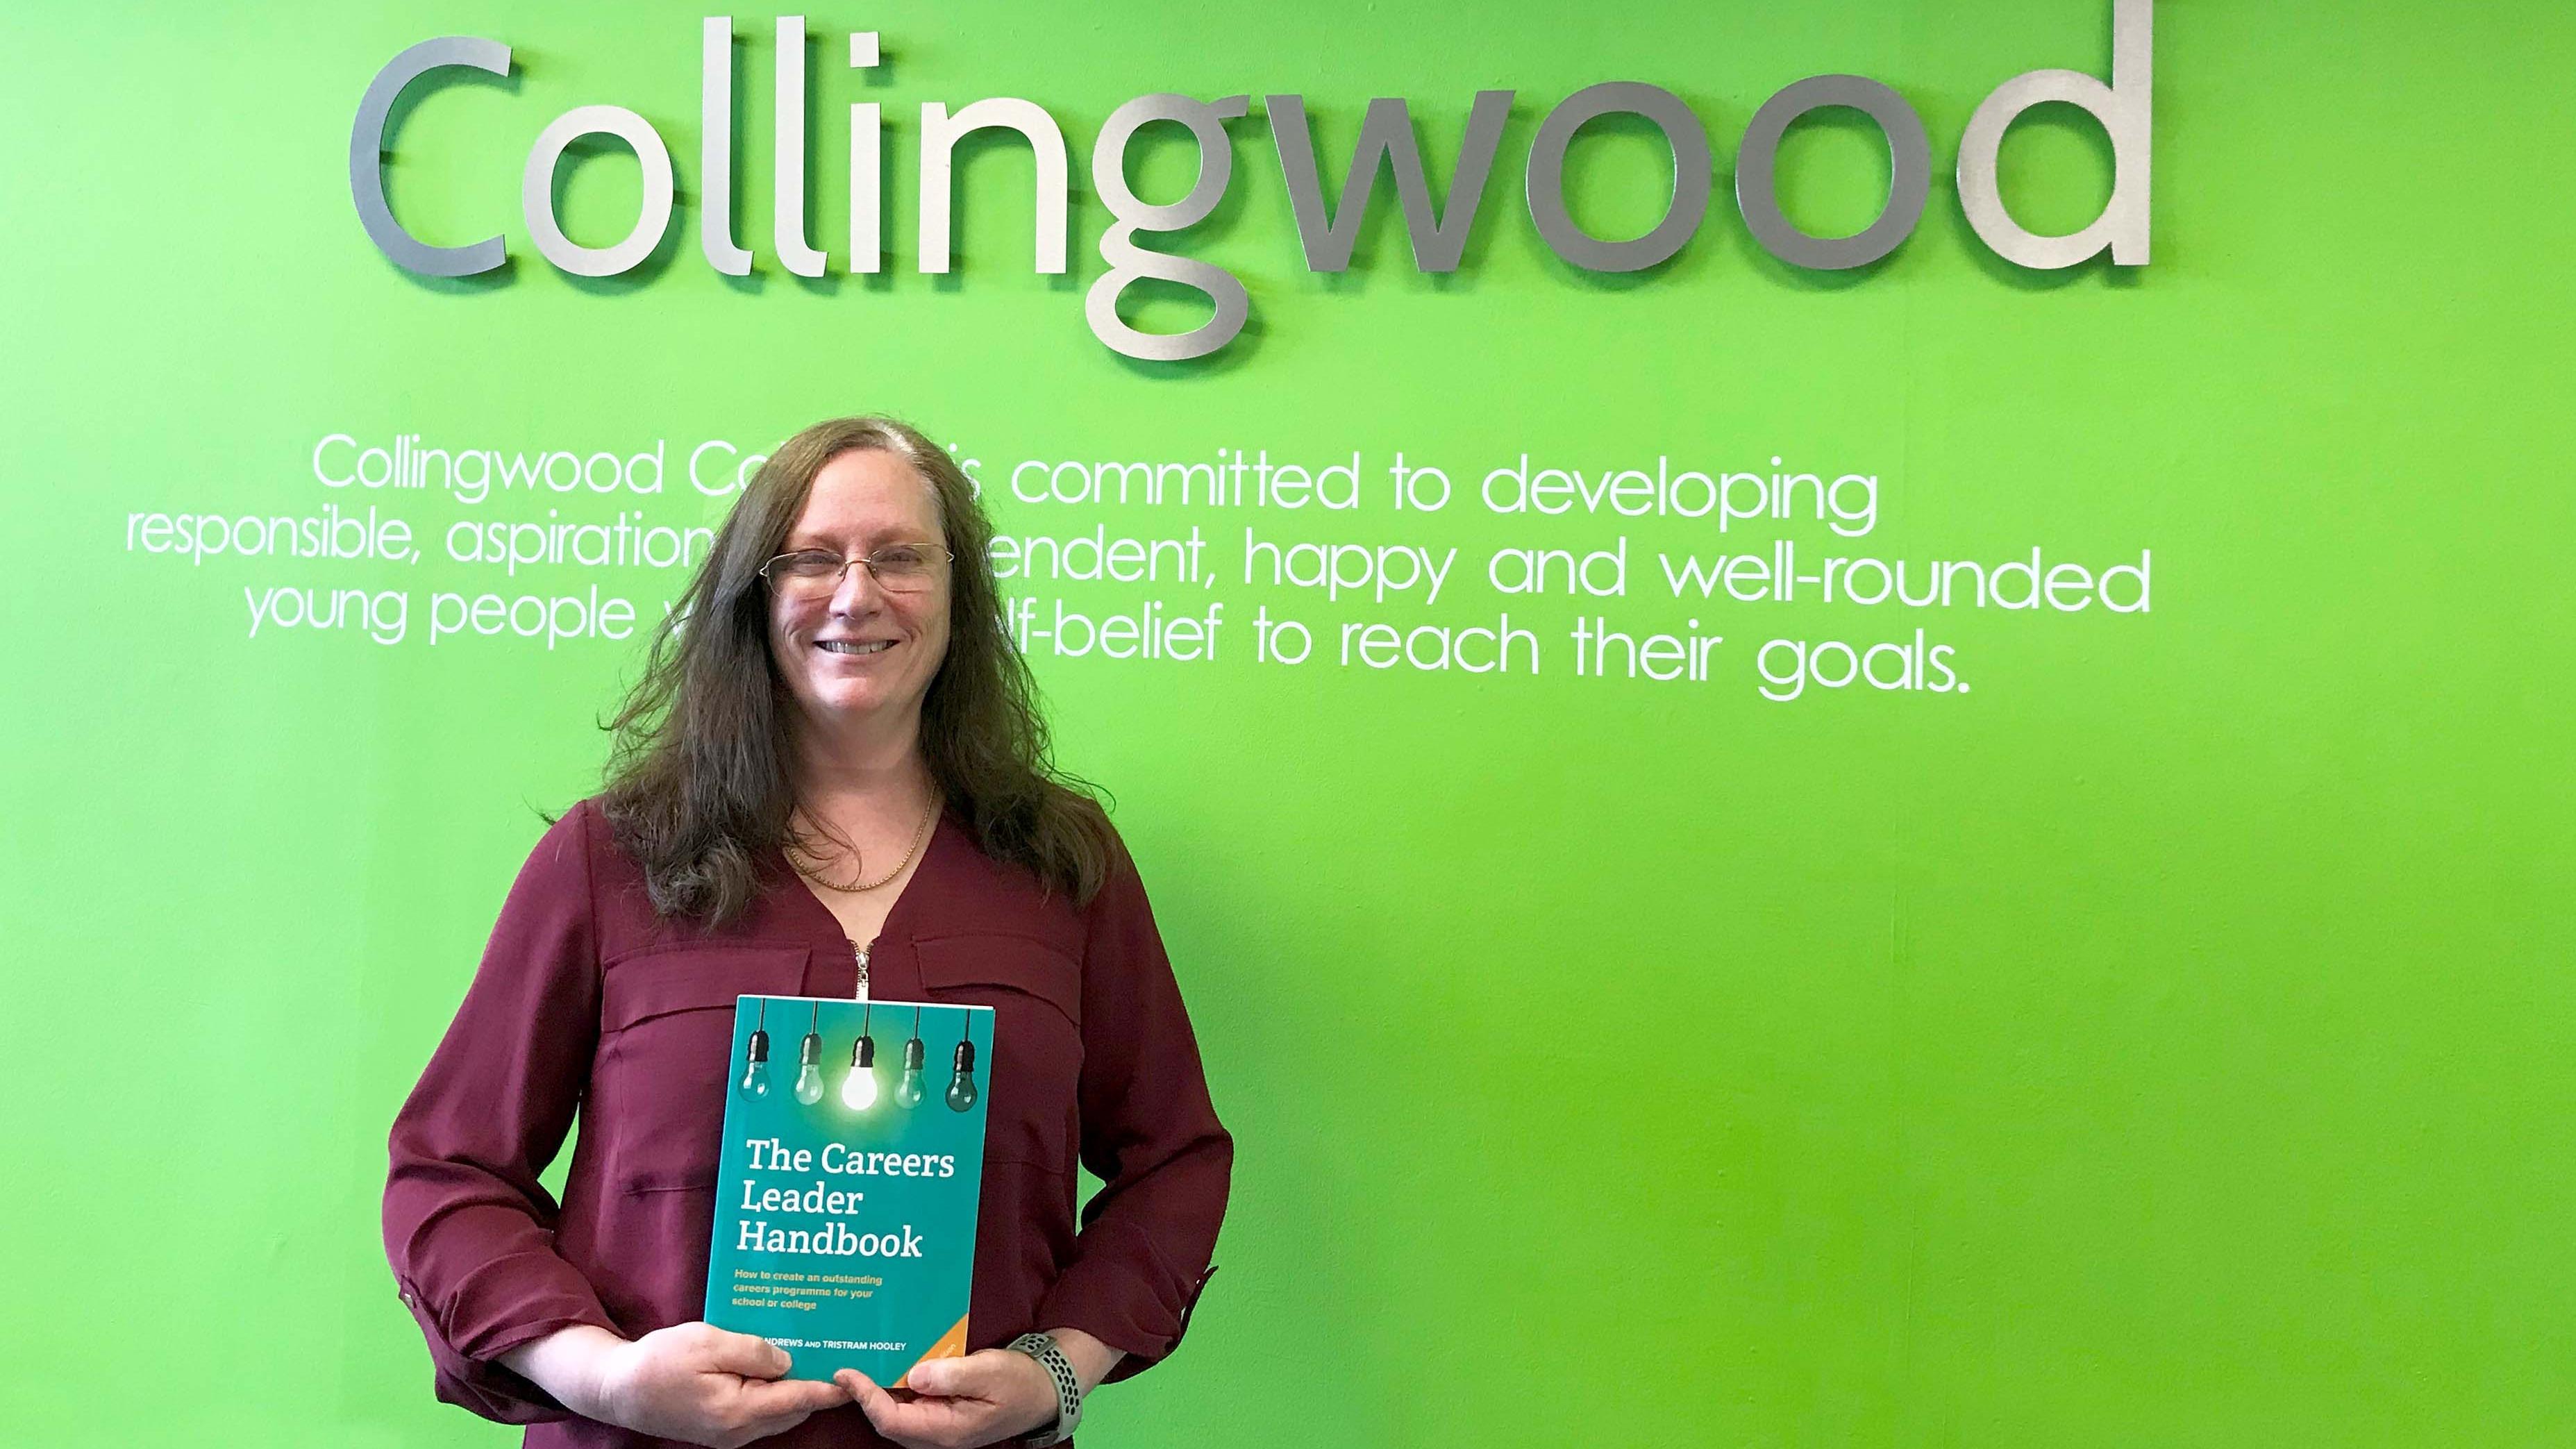 Emma Clelland, from Collingwood College, with a copy of The Careers Leader Handbook